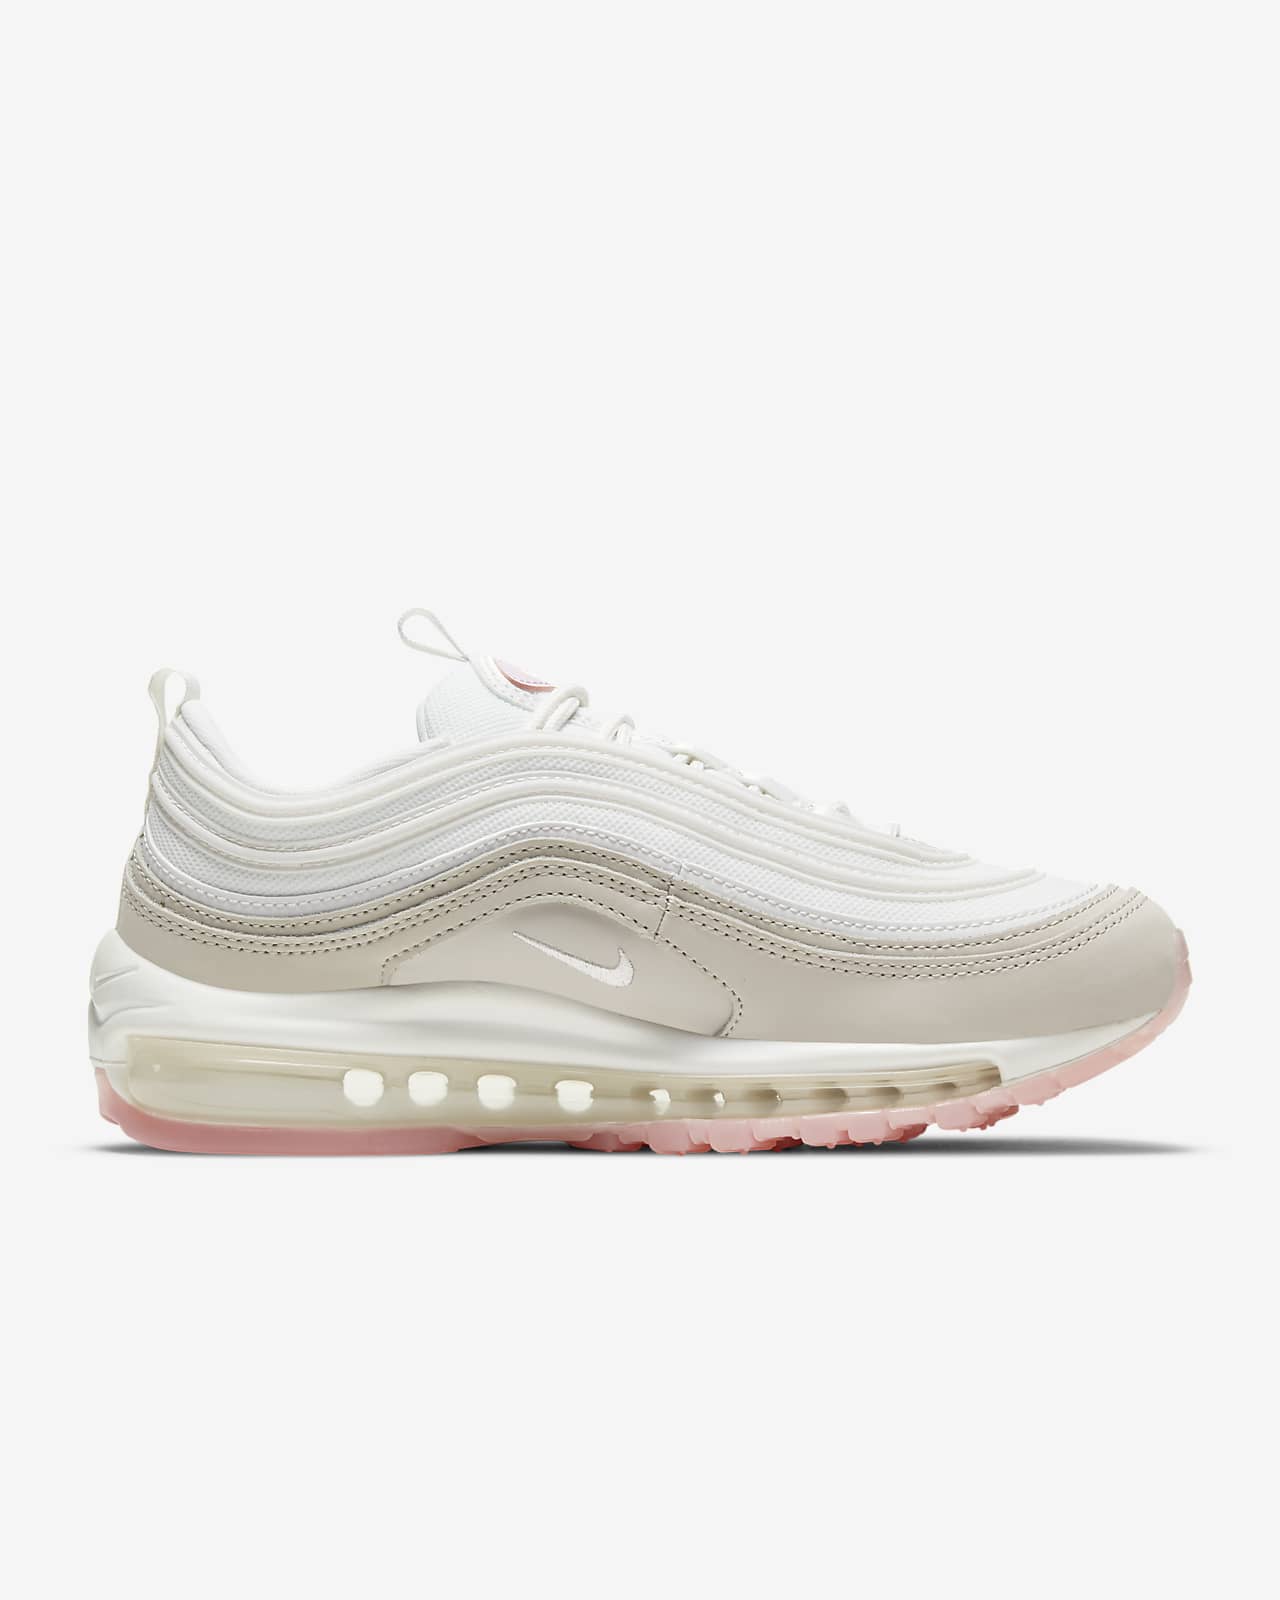 nike women's air max 97 shoes light pink